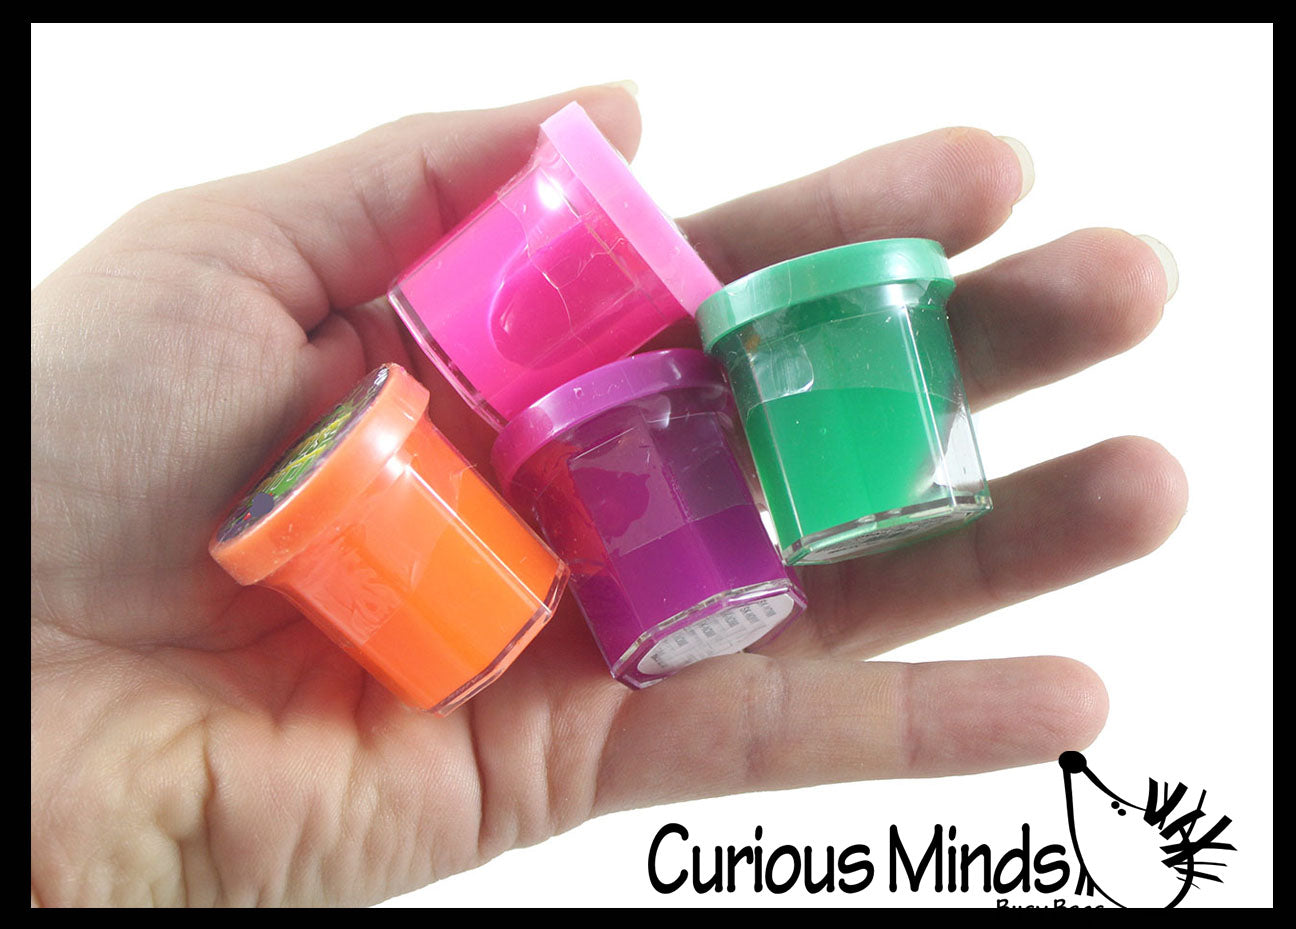 Mini Neon Noise Fart Putty - Mini Slime Containers for Halloween Goody Bags - Trick or Treat Bulk - Set of 48 Slimes (4 Dozen)